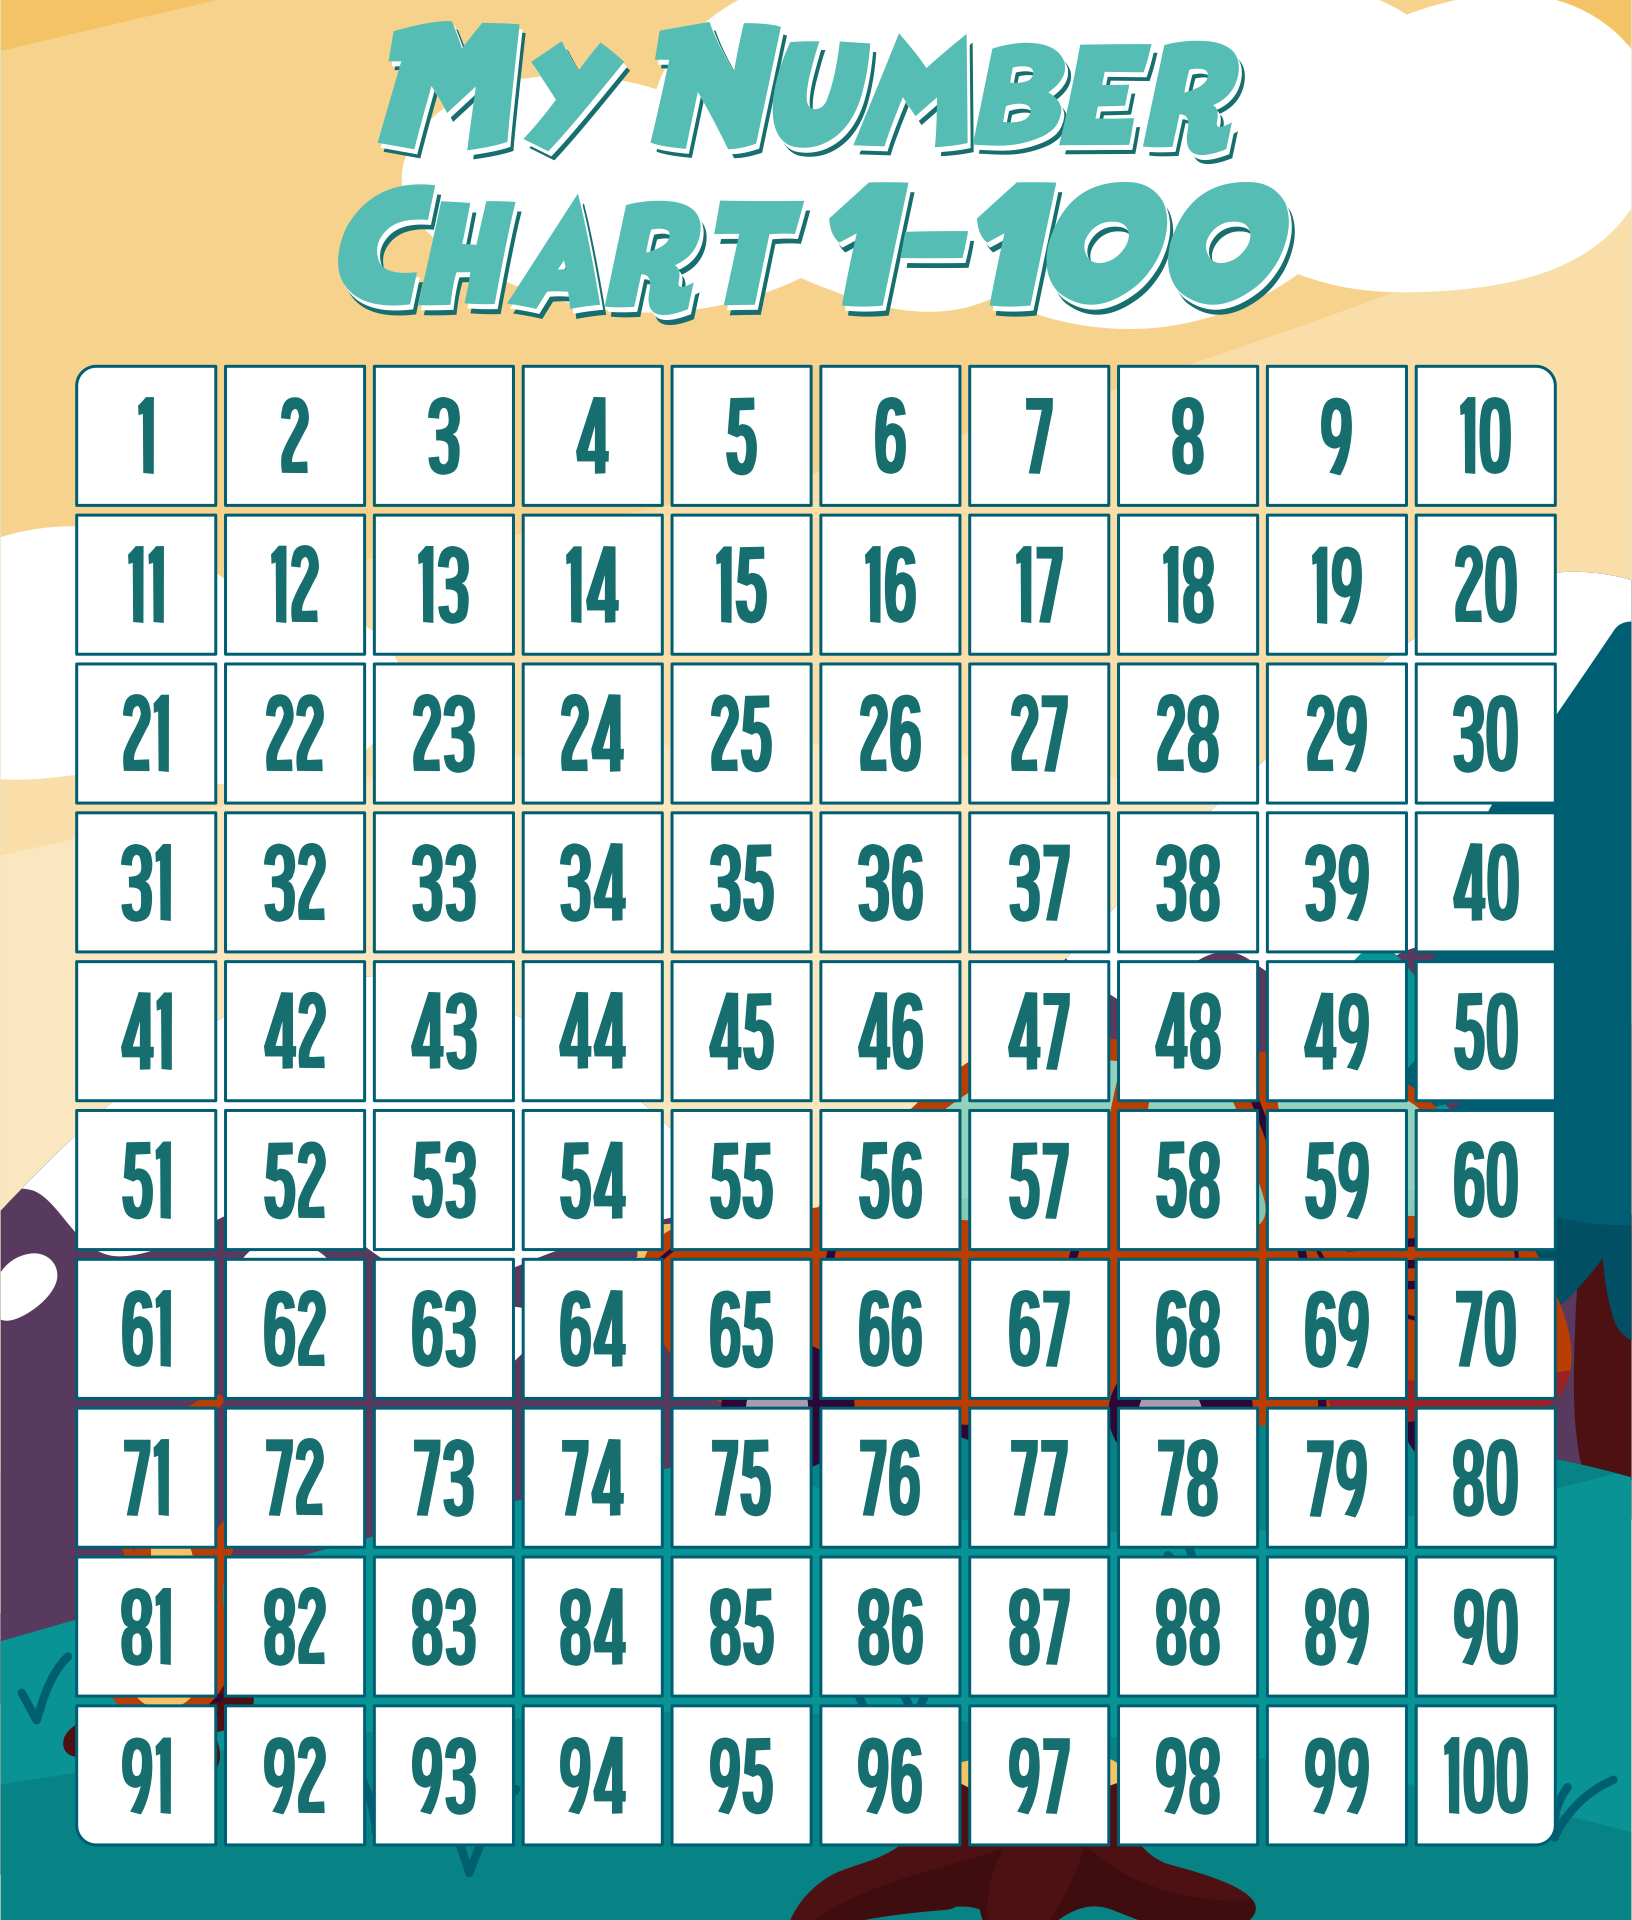 list prime numbers between 1 and 100